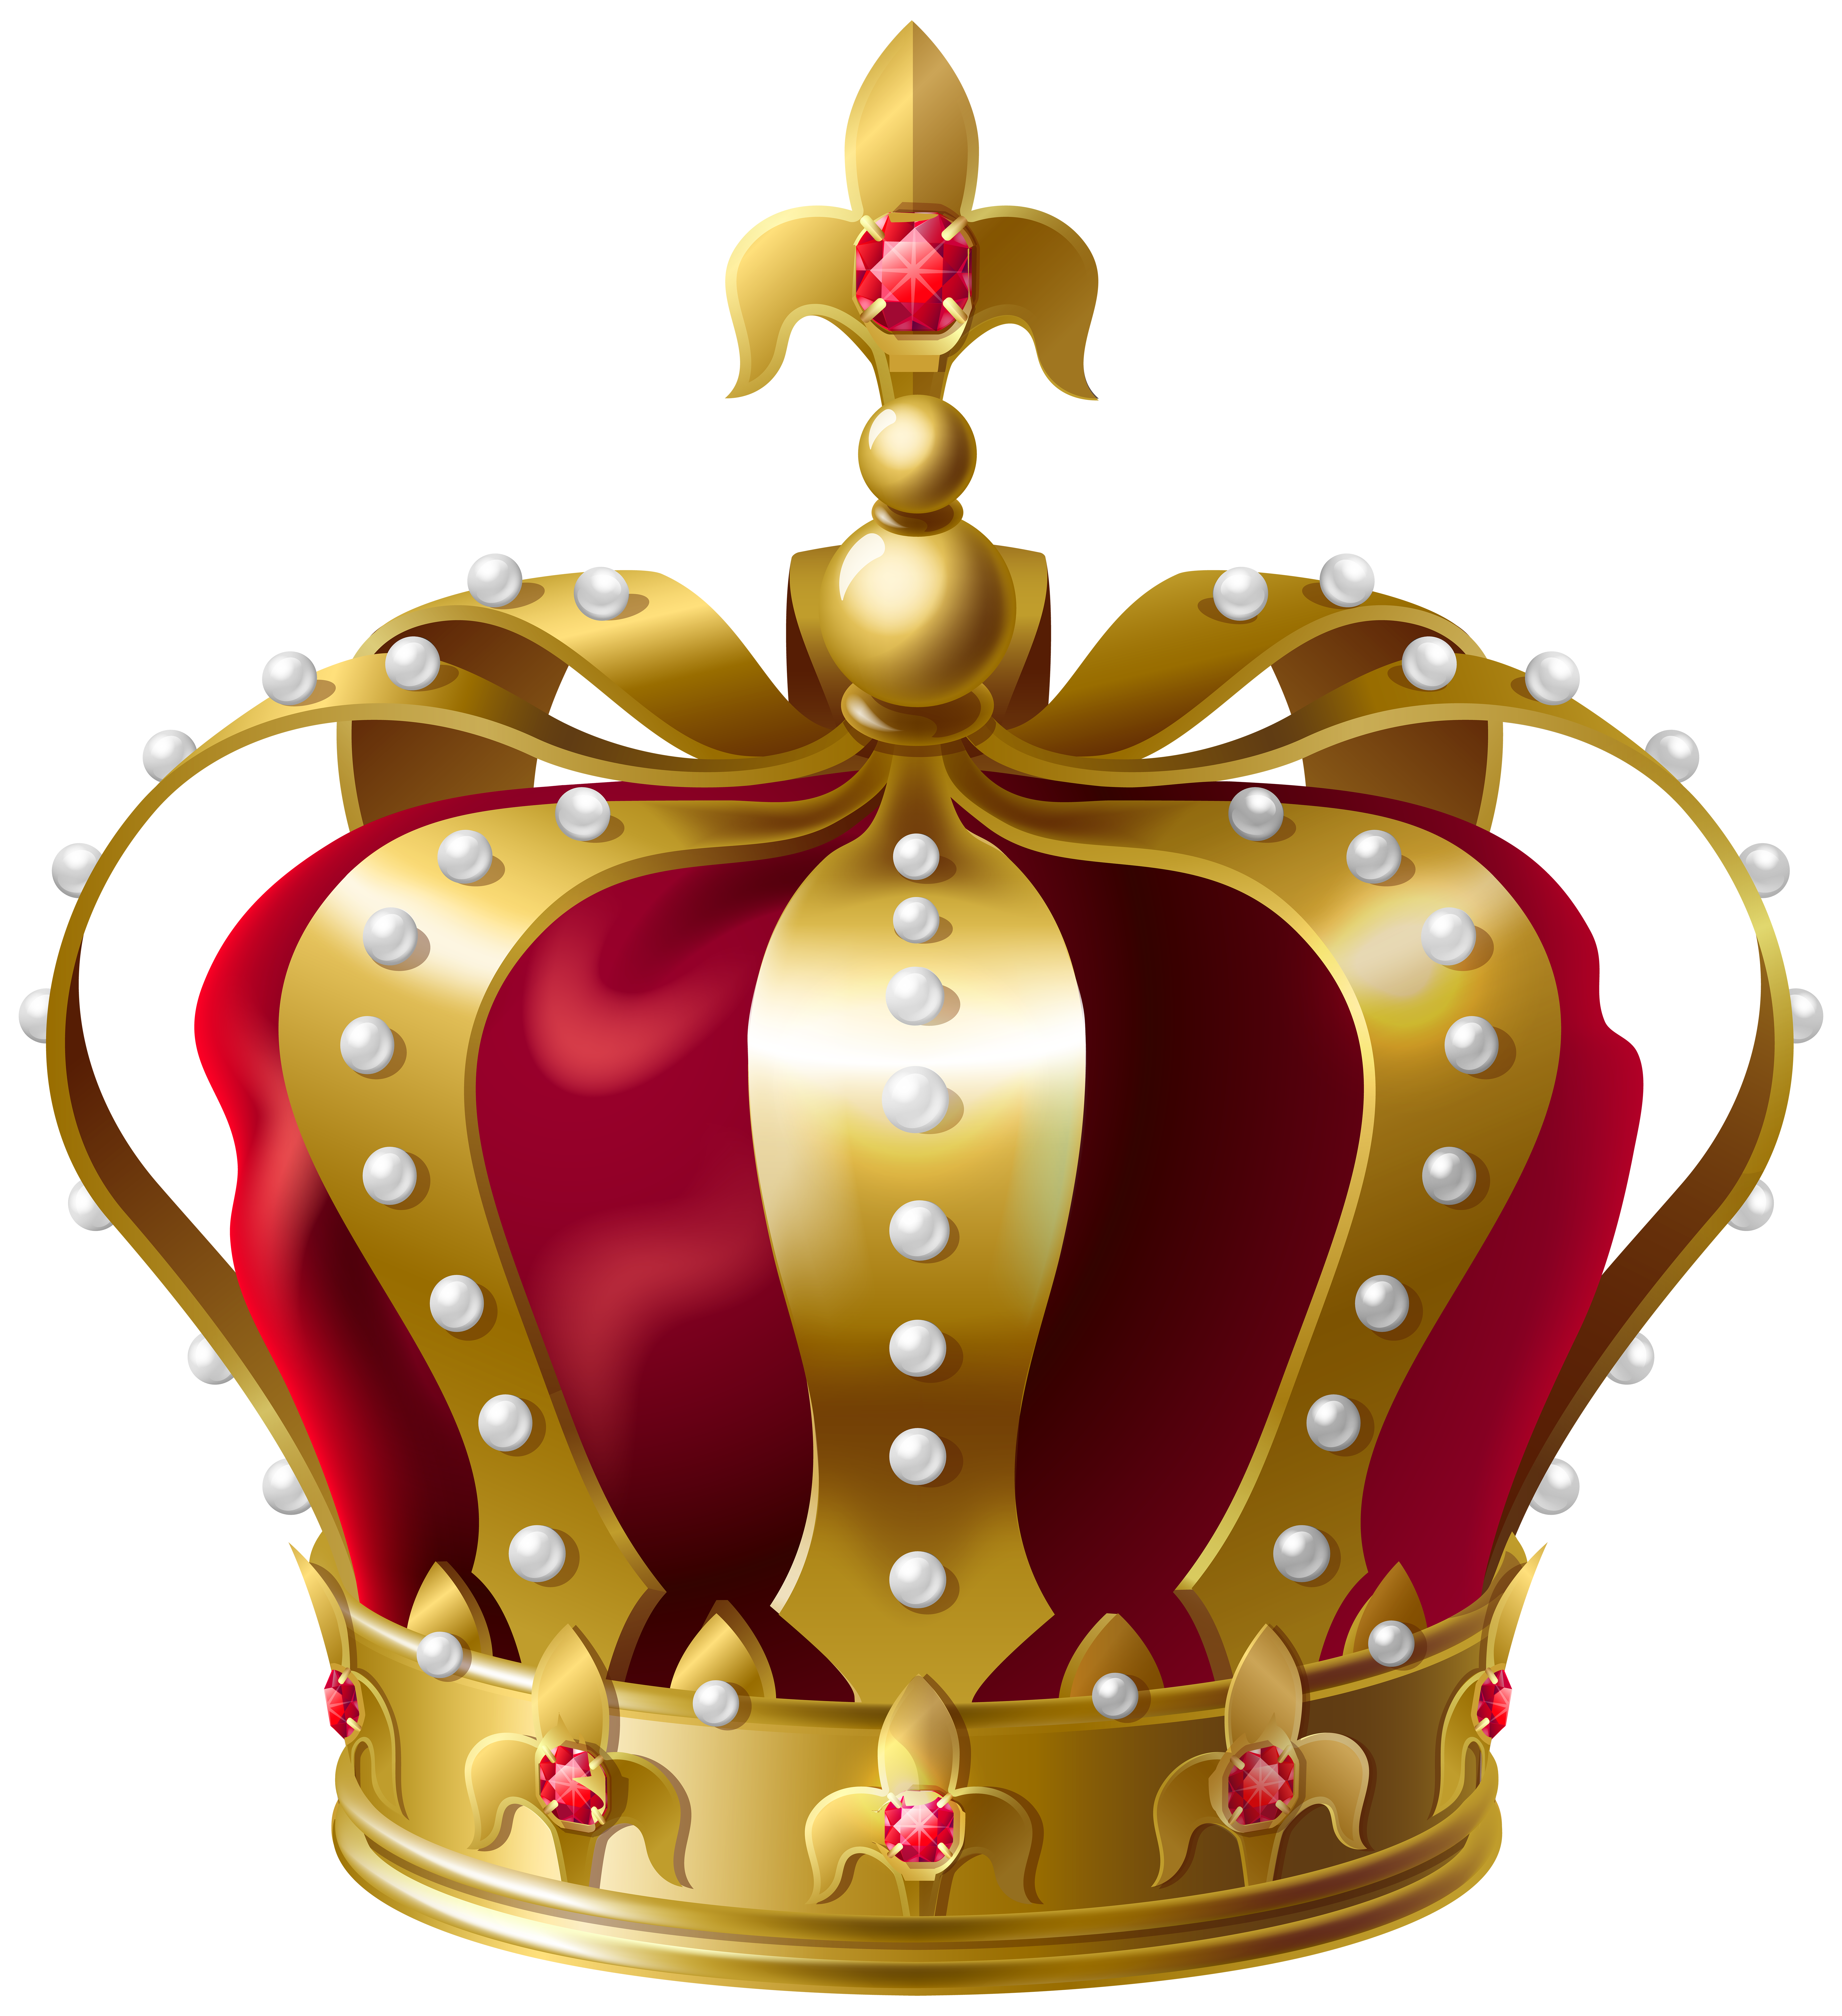 King transparent png clip. Clipart crown teal